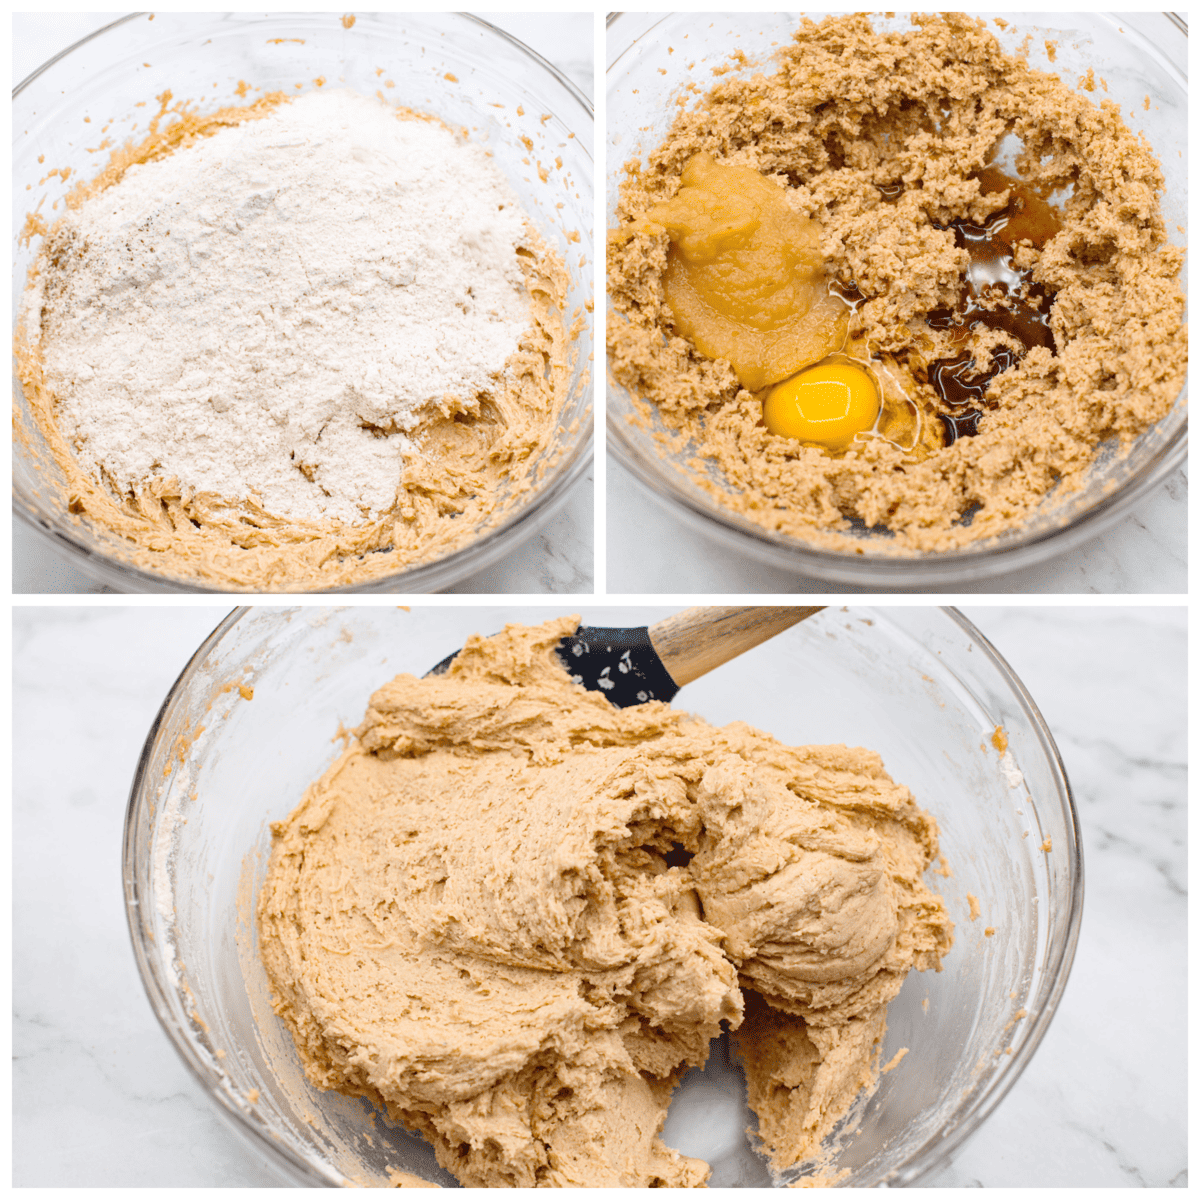 3 pictures showing how to mix up the cookie dough. 